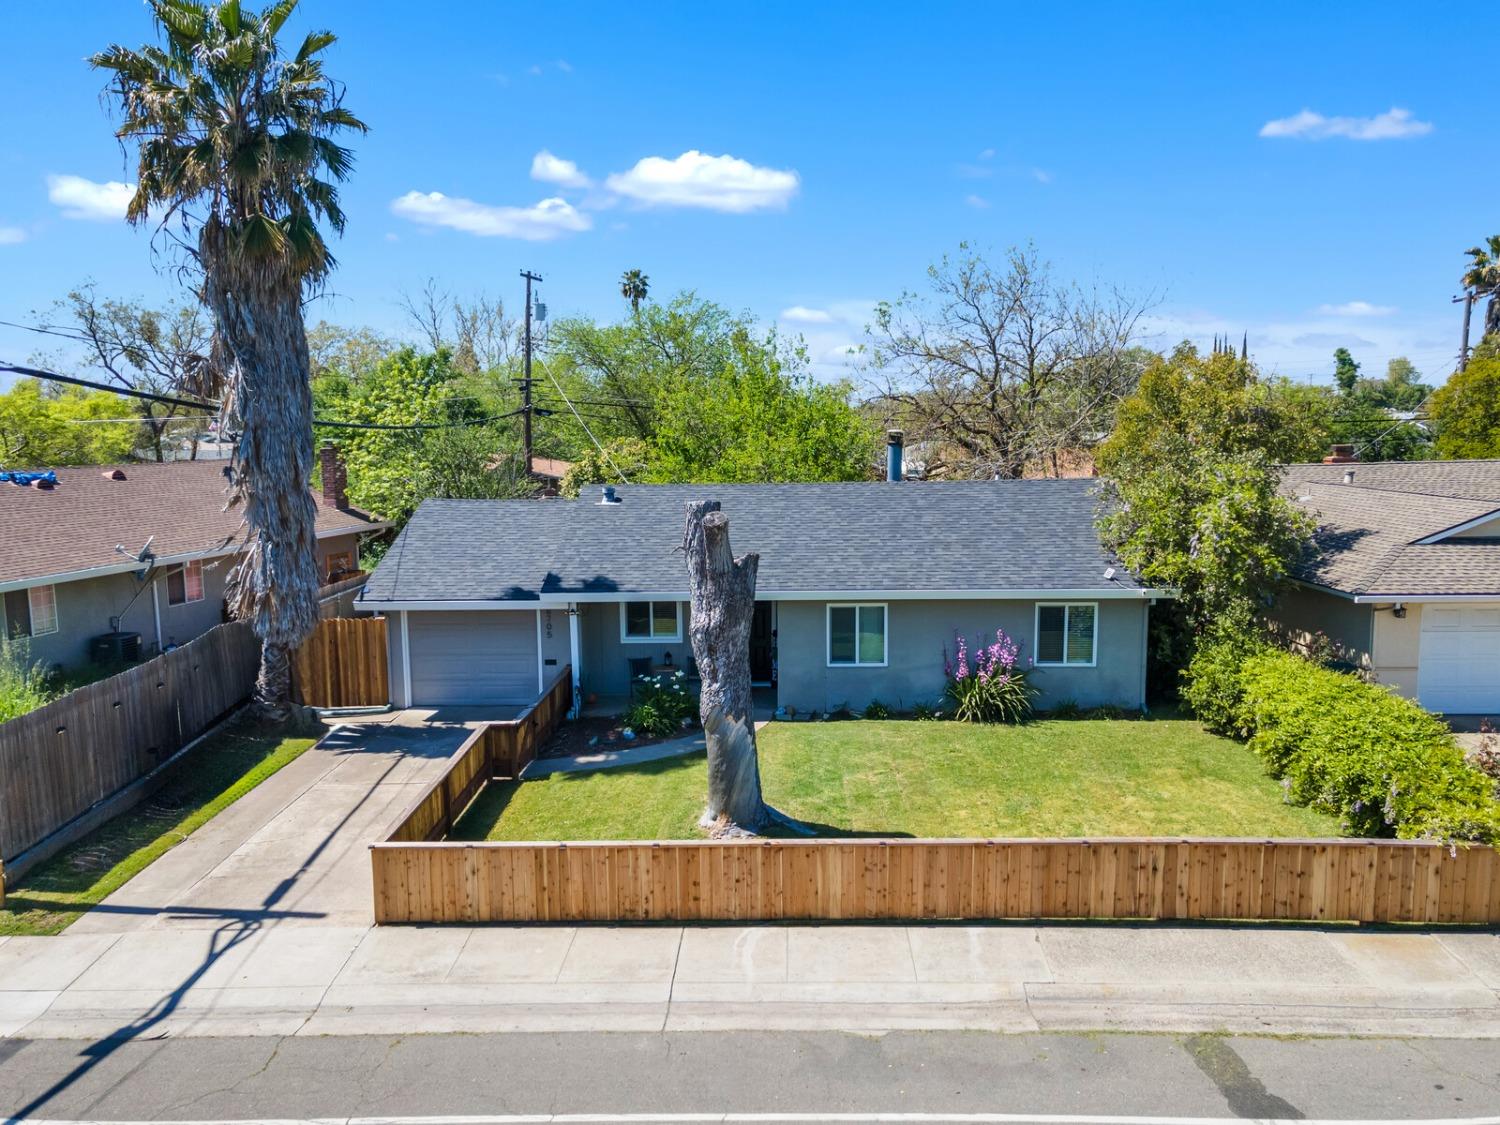 Photo of 6705 Larchmont Dr in North Highlands, CA